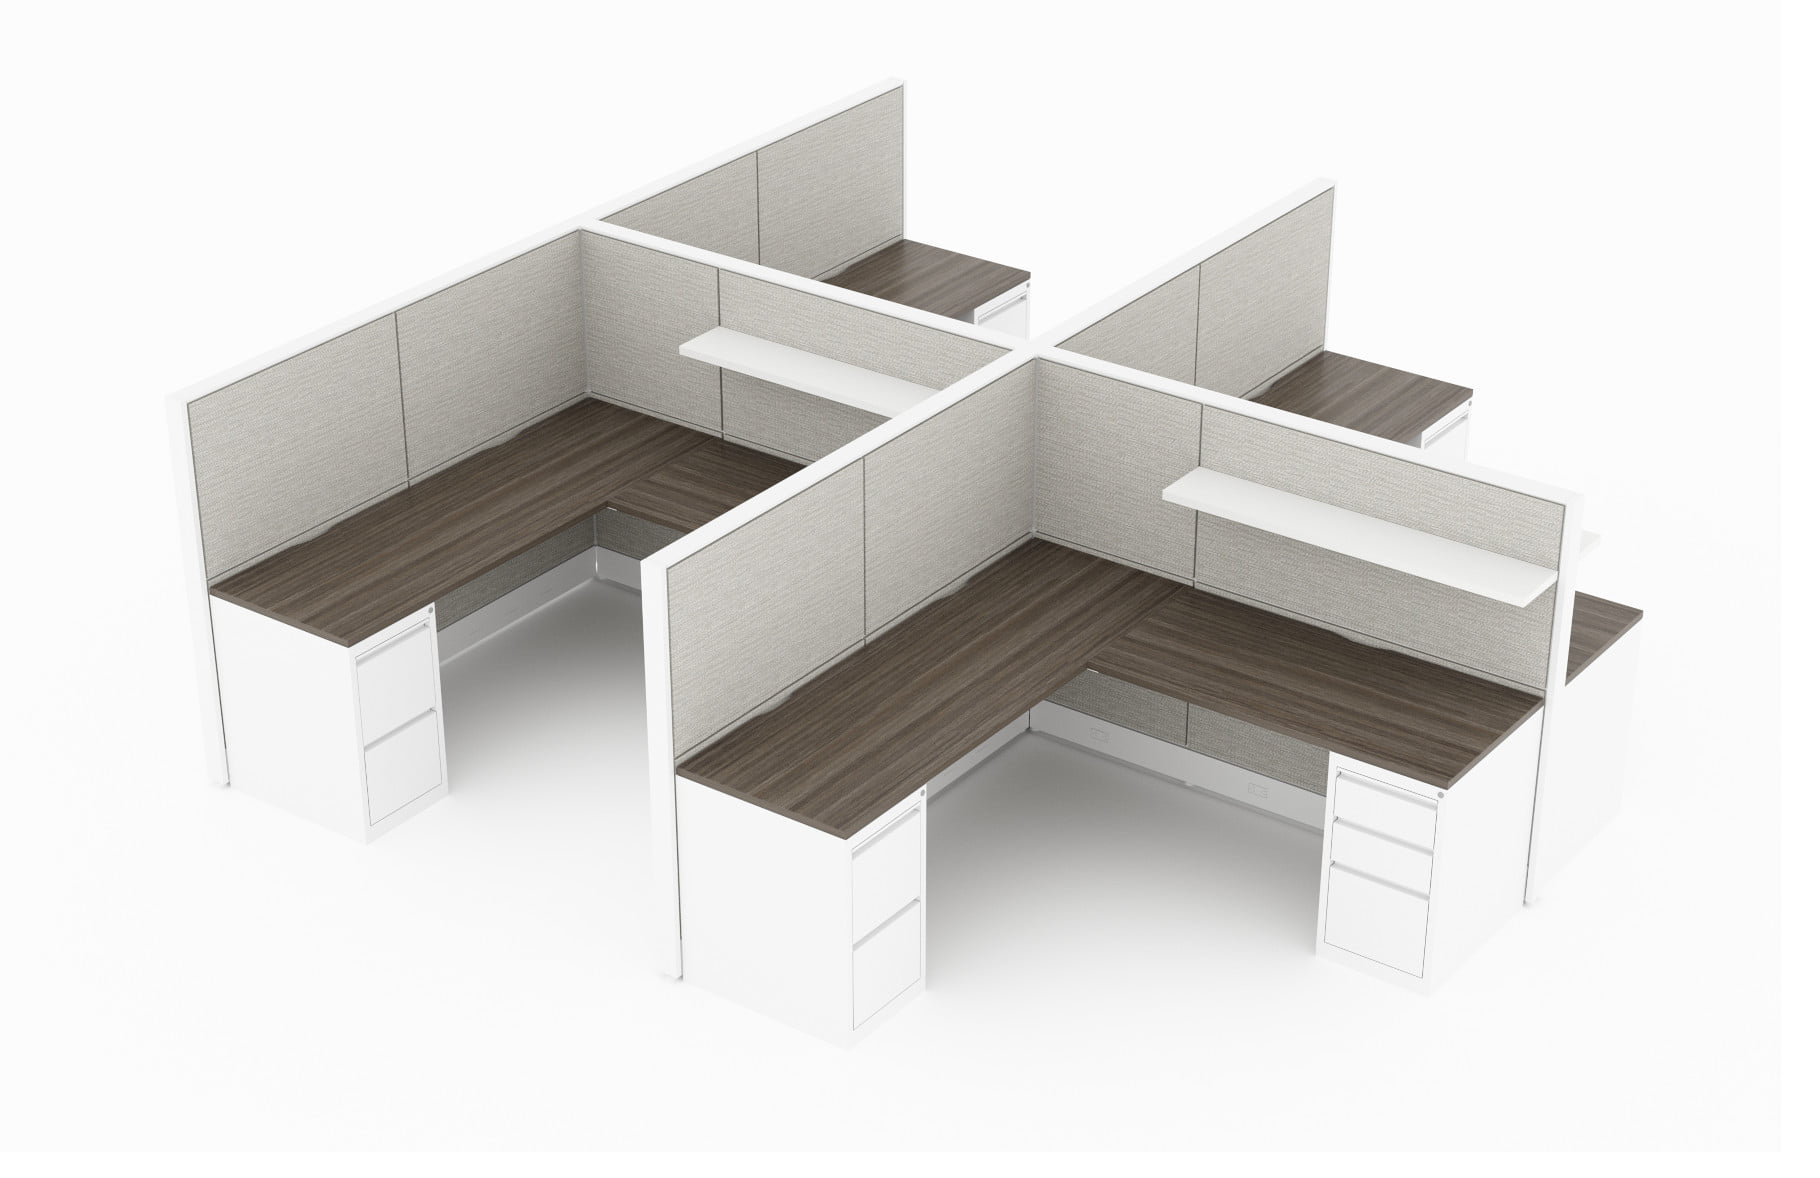 4-Person set of L-shaped workstations, with end paneling. Mobile pedestal drawers are underneath each side of each work area. A small wide shelf is mounted on the paneling that separates facing workstations. It is rendered on a white background. Model is EV511.